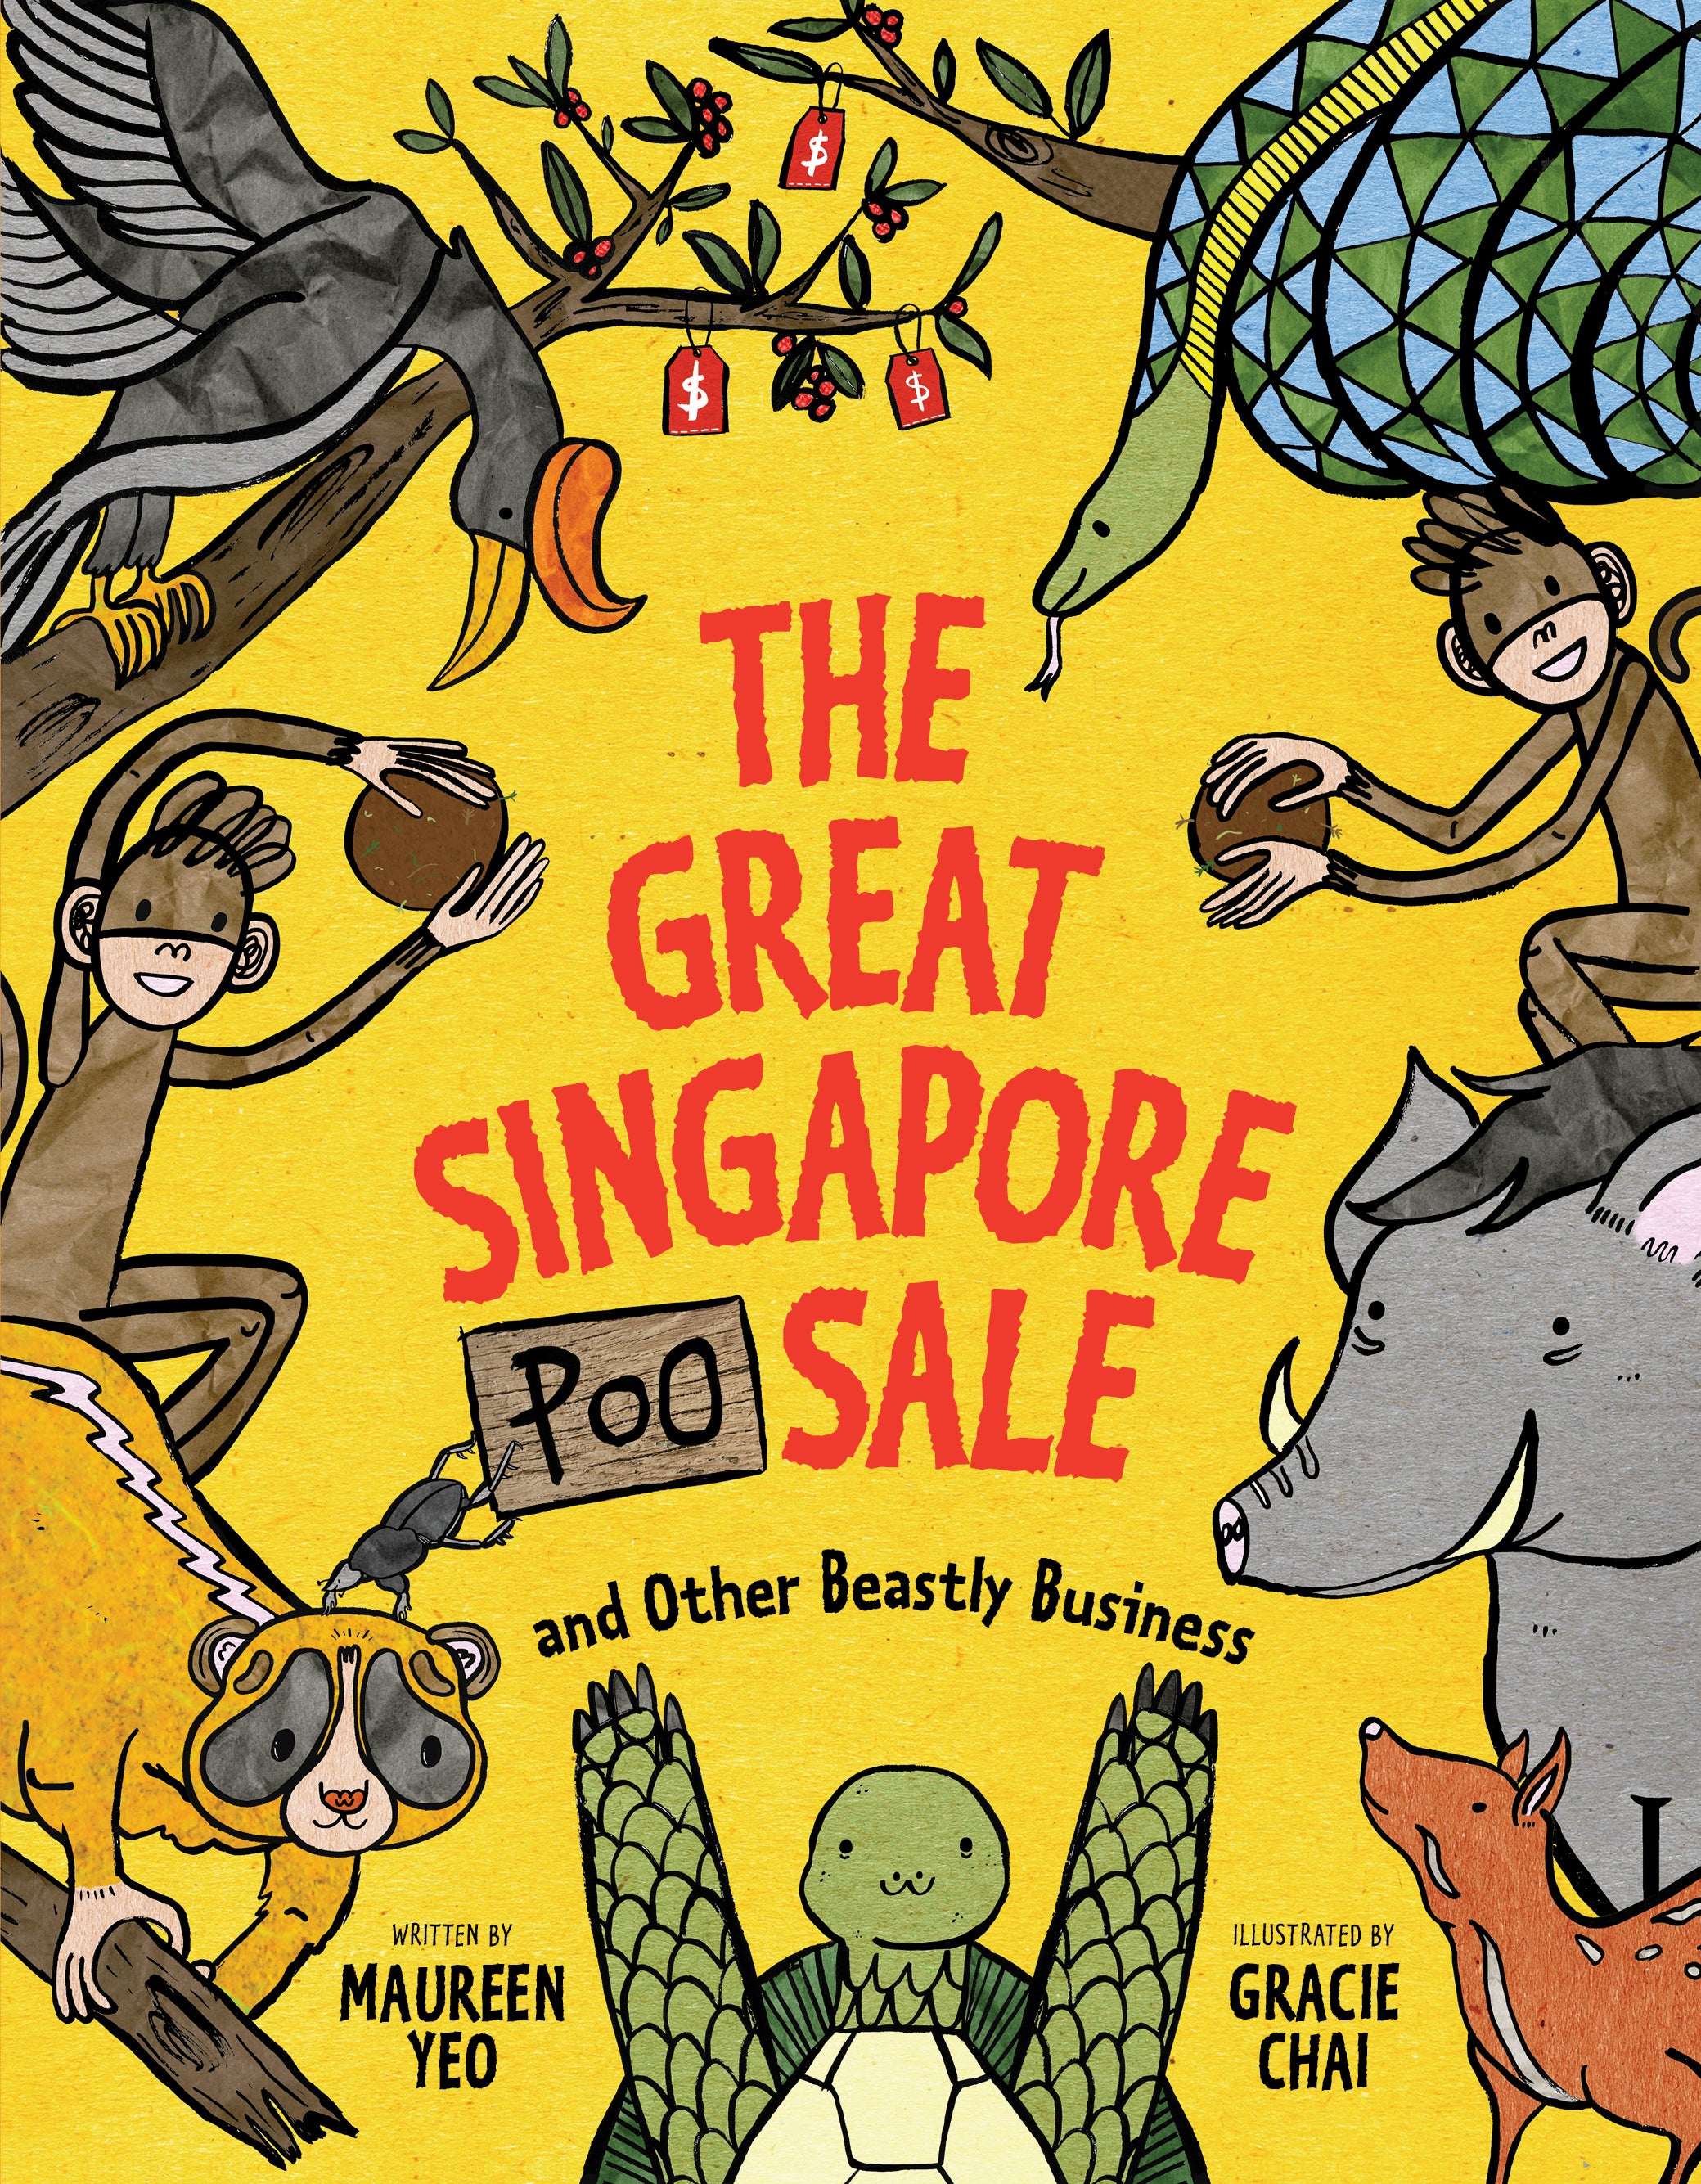 The Great Singapore Poo Sale and Other Beastly Business